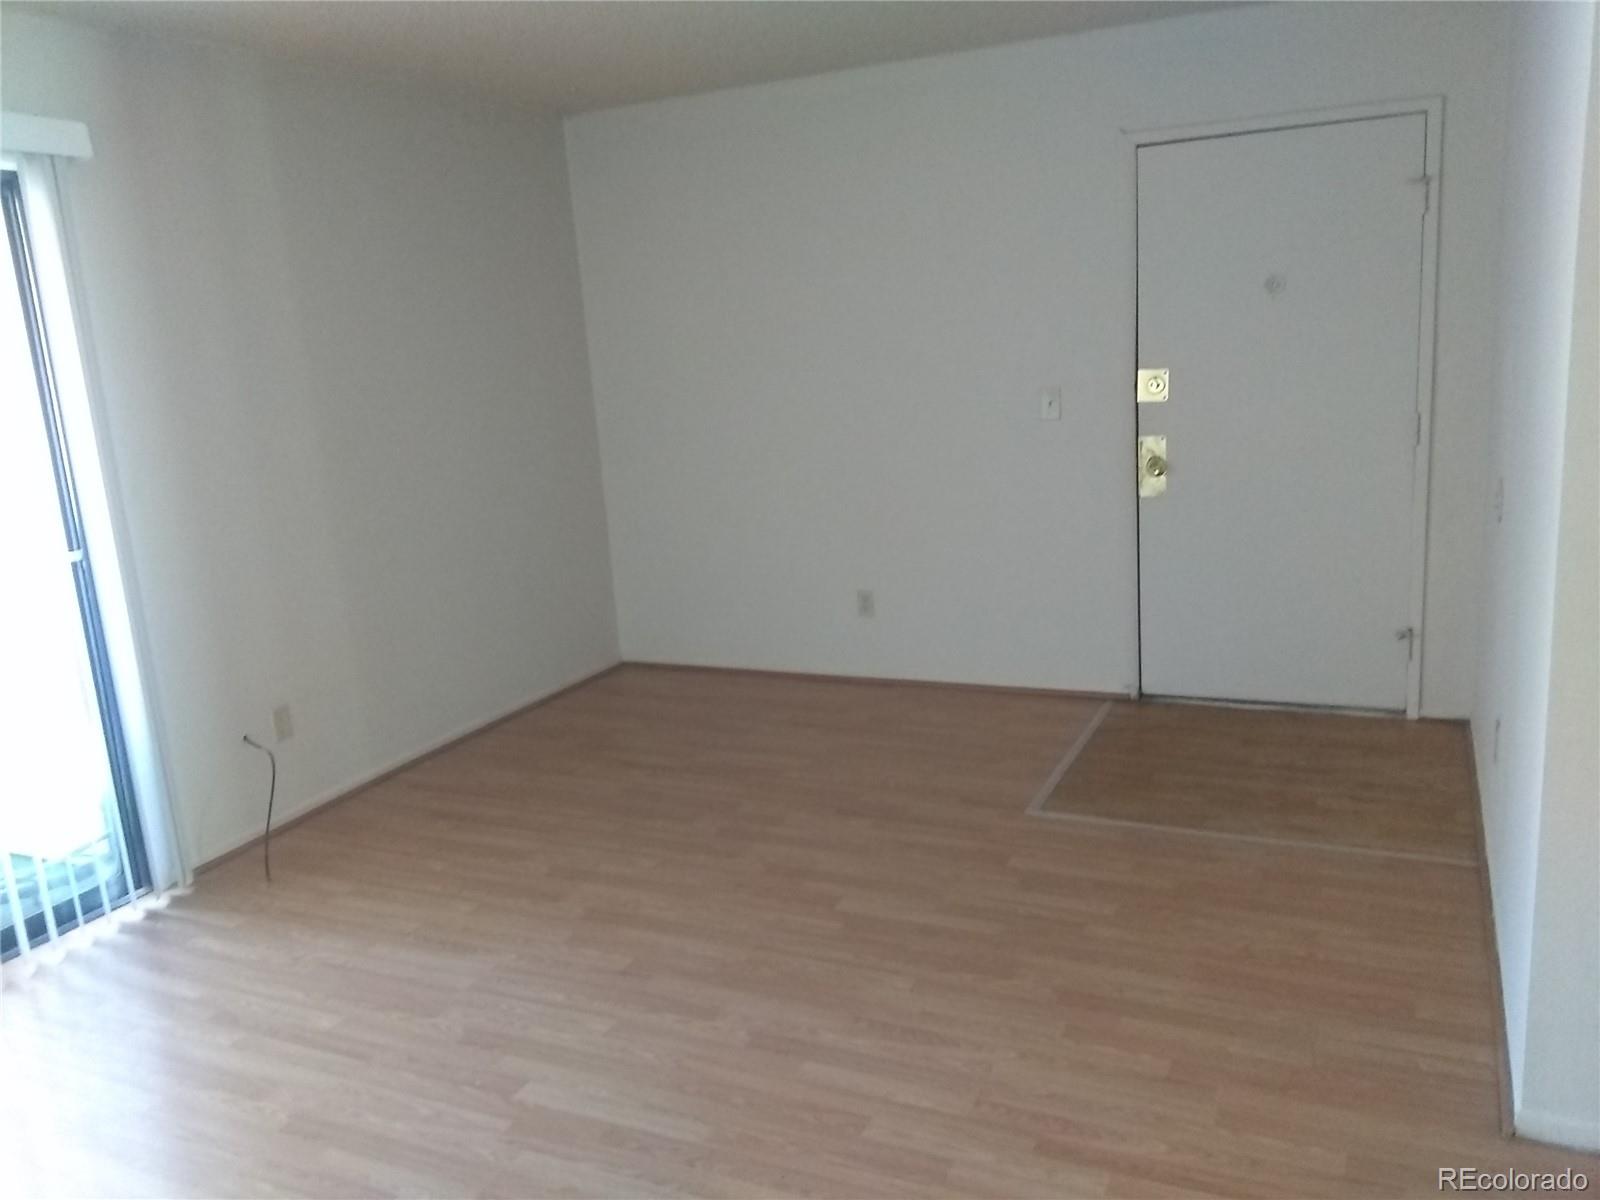 an empty room with an entryway